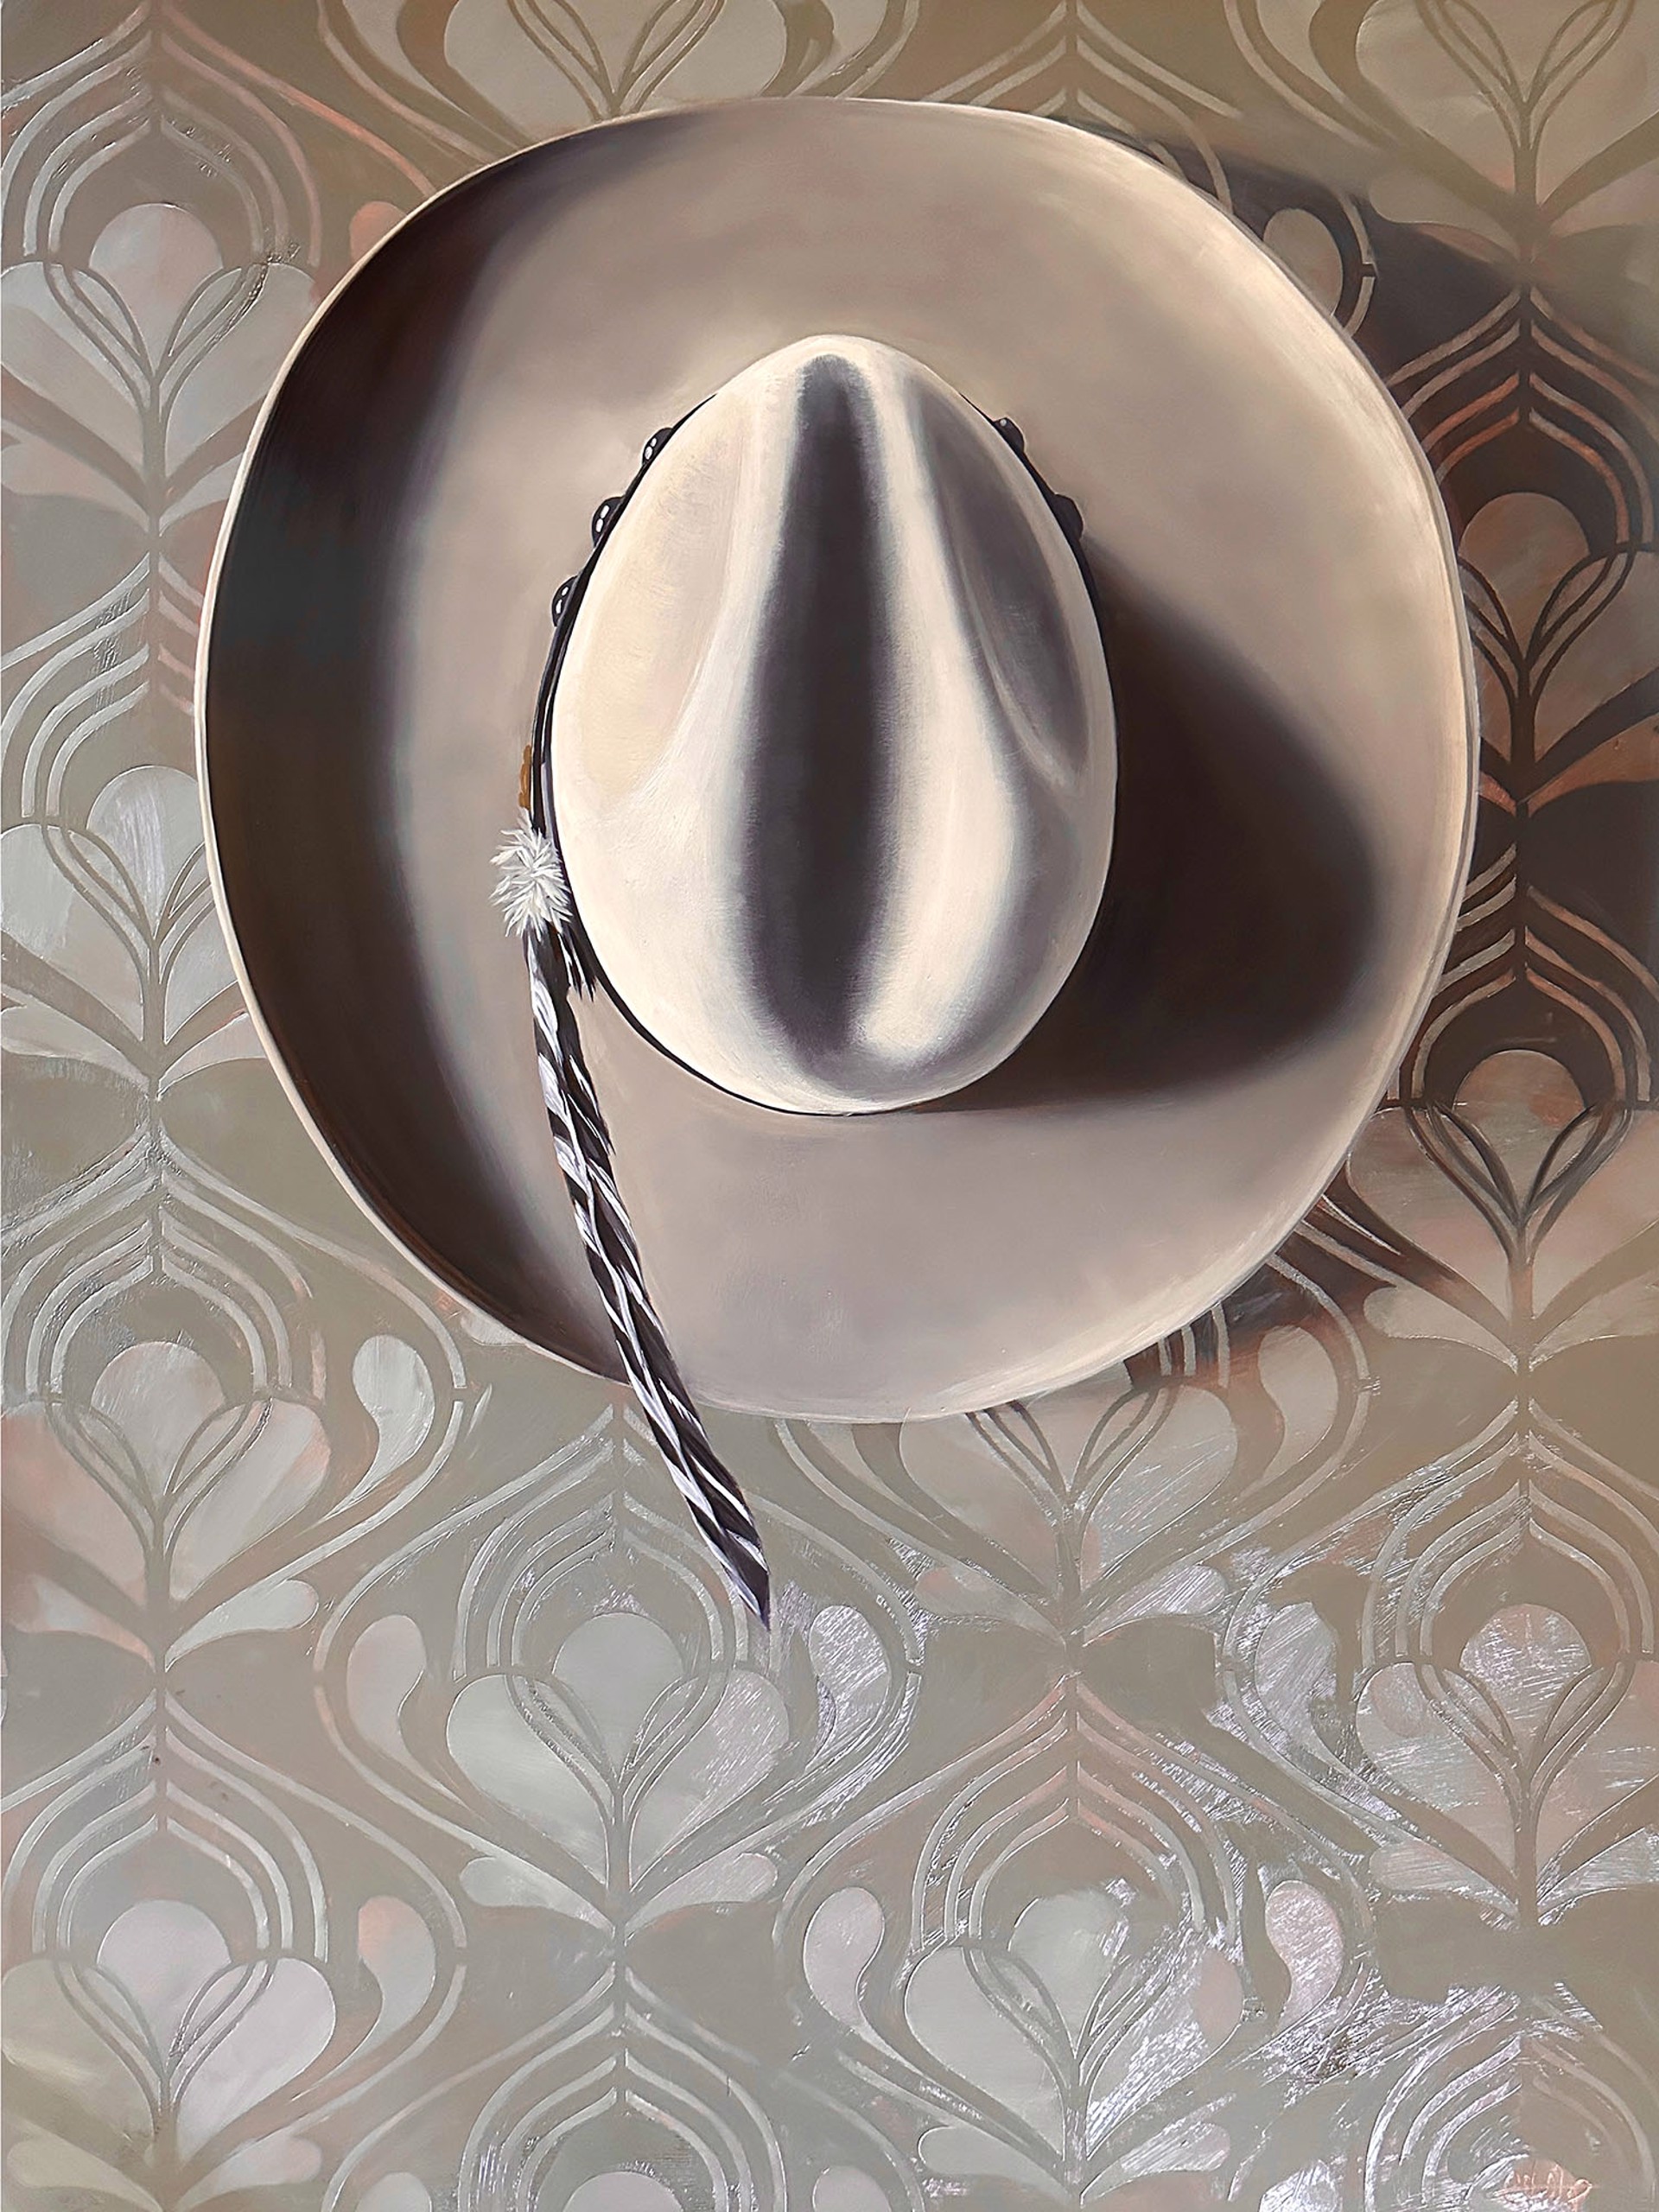 Original Oil Painting By Christy Stallop Featuring A Beige Stetson Hat Hanging Against Art Deco Wallpaper